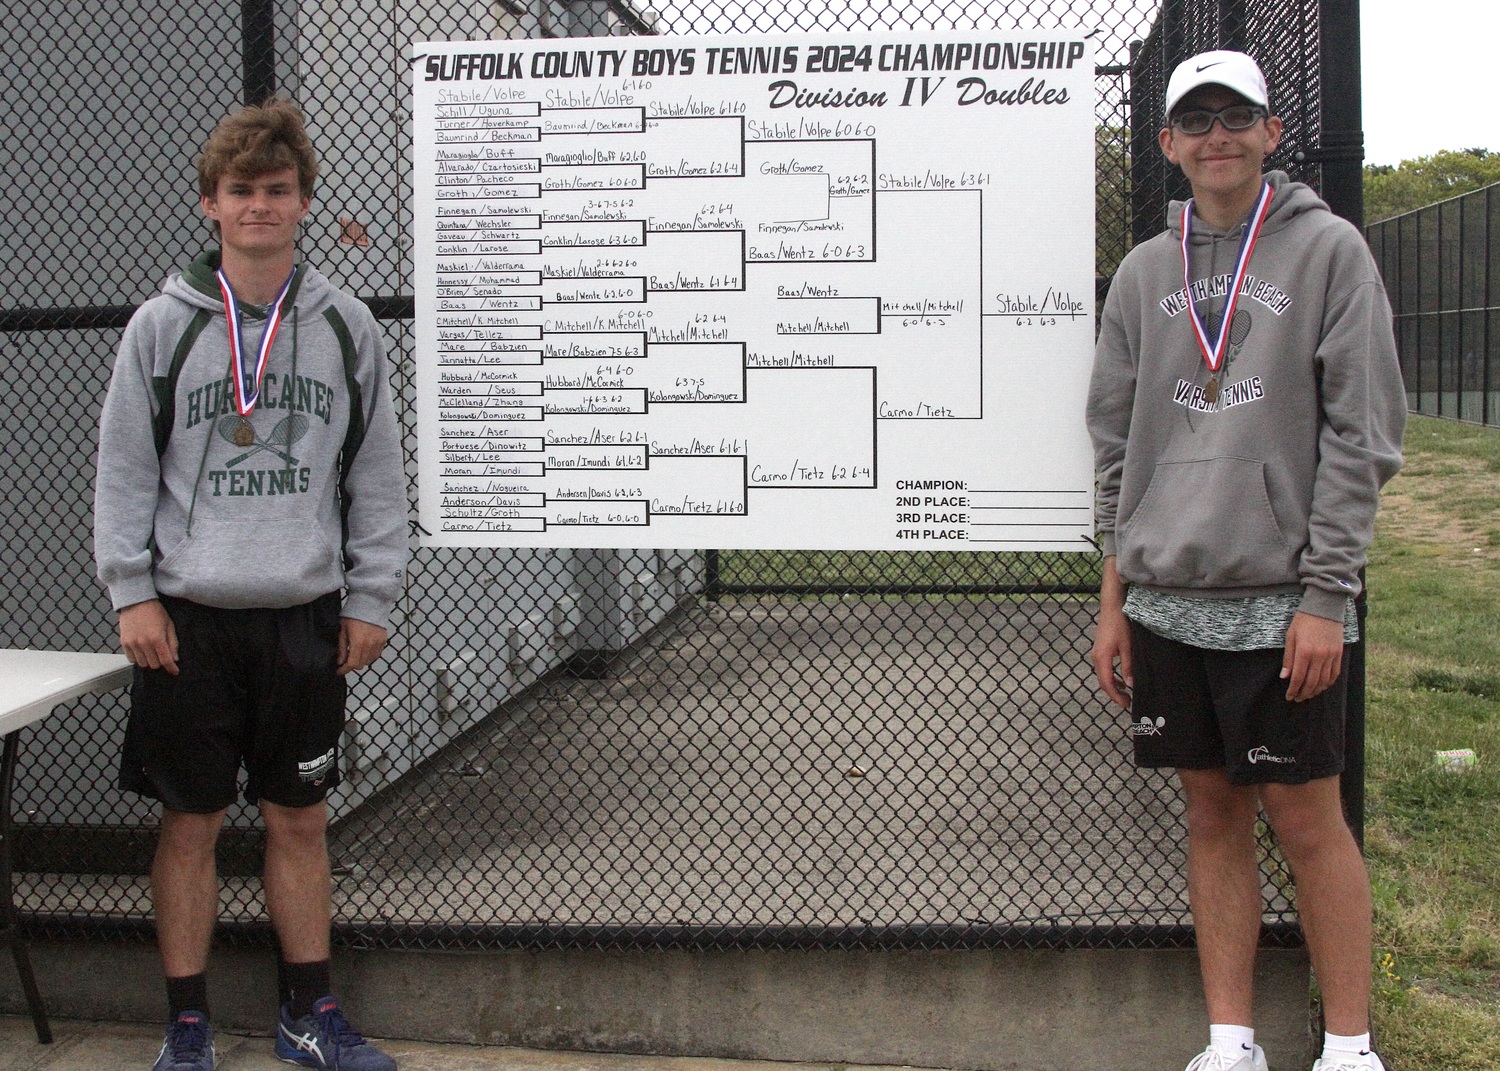 Senior Bobby Stabile and junior Giancarlo Volpe won the Division IV doubles title. DESIRÉE KEEGAN